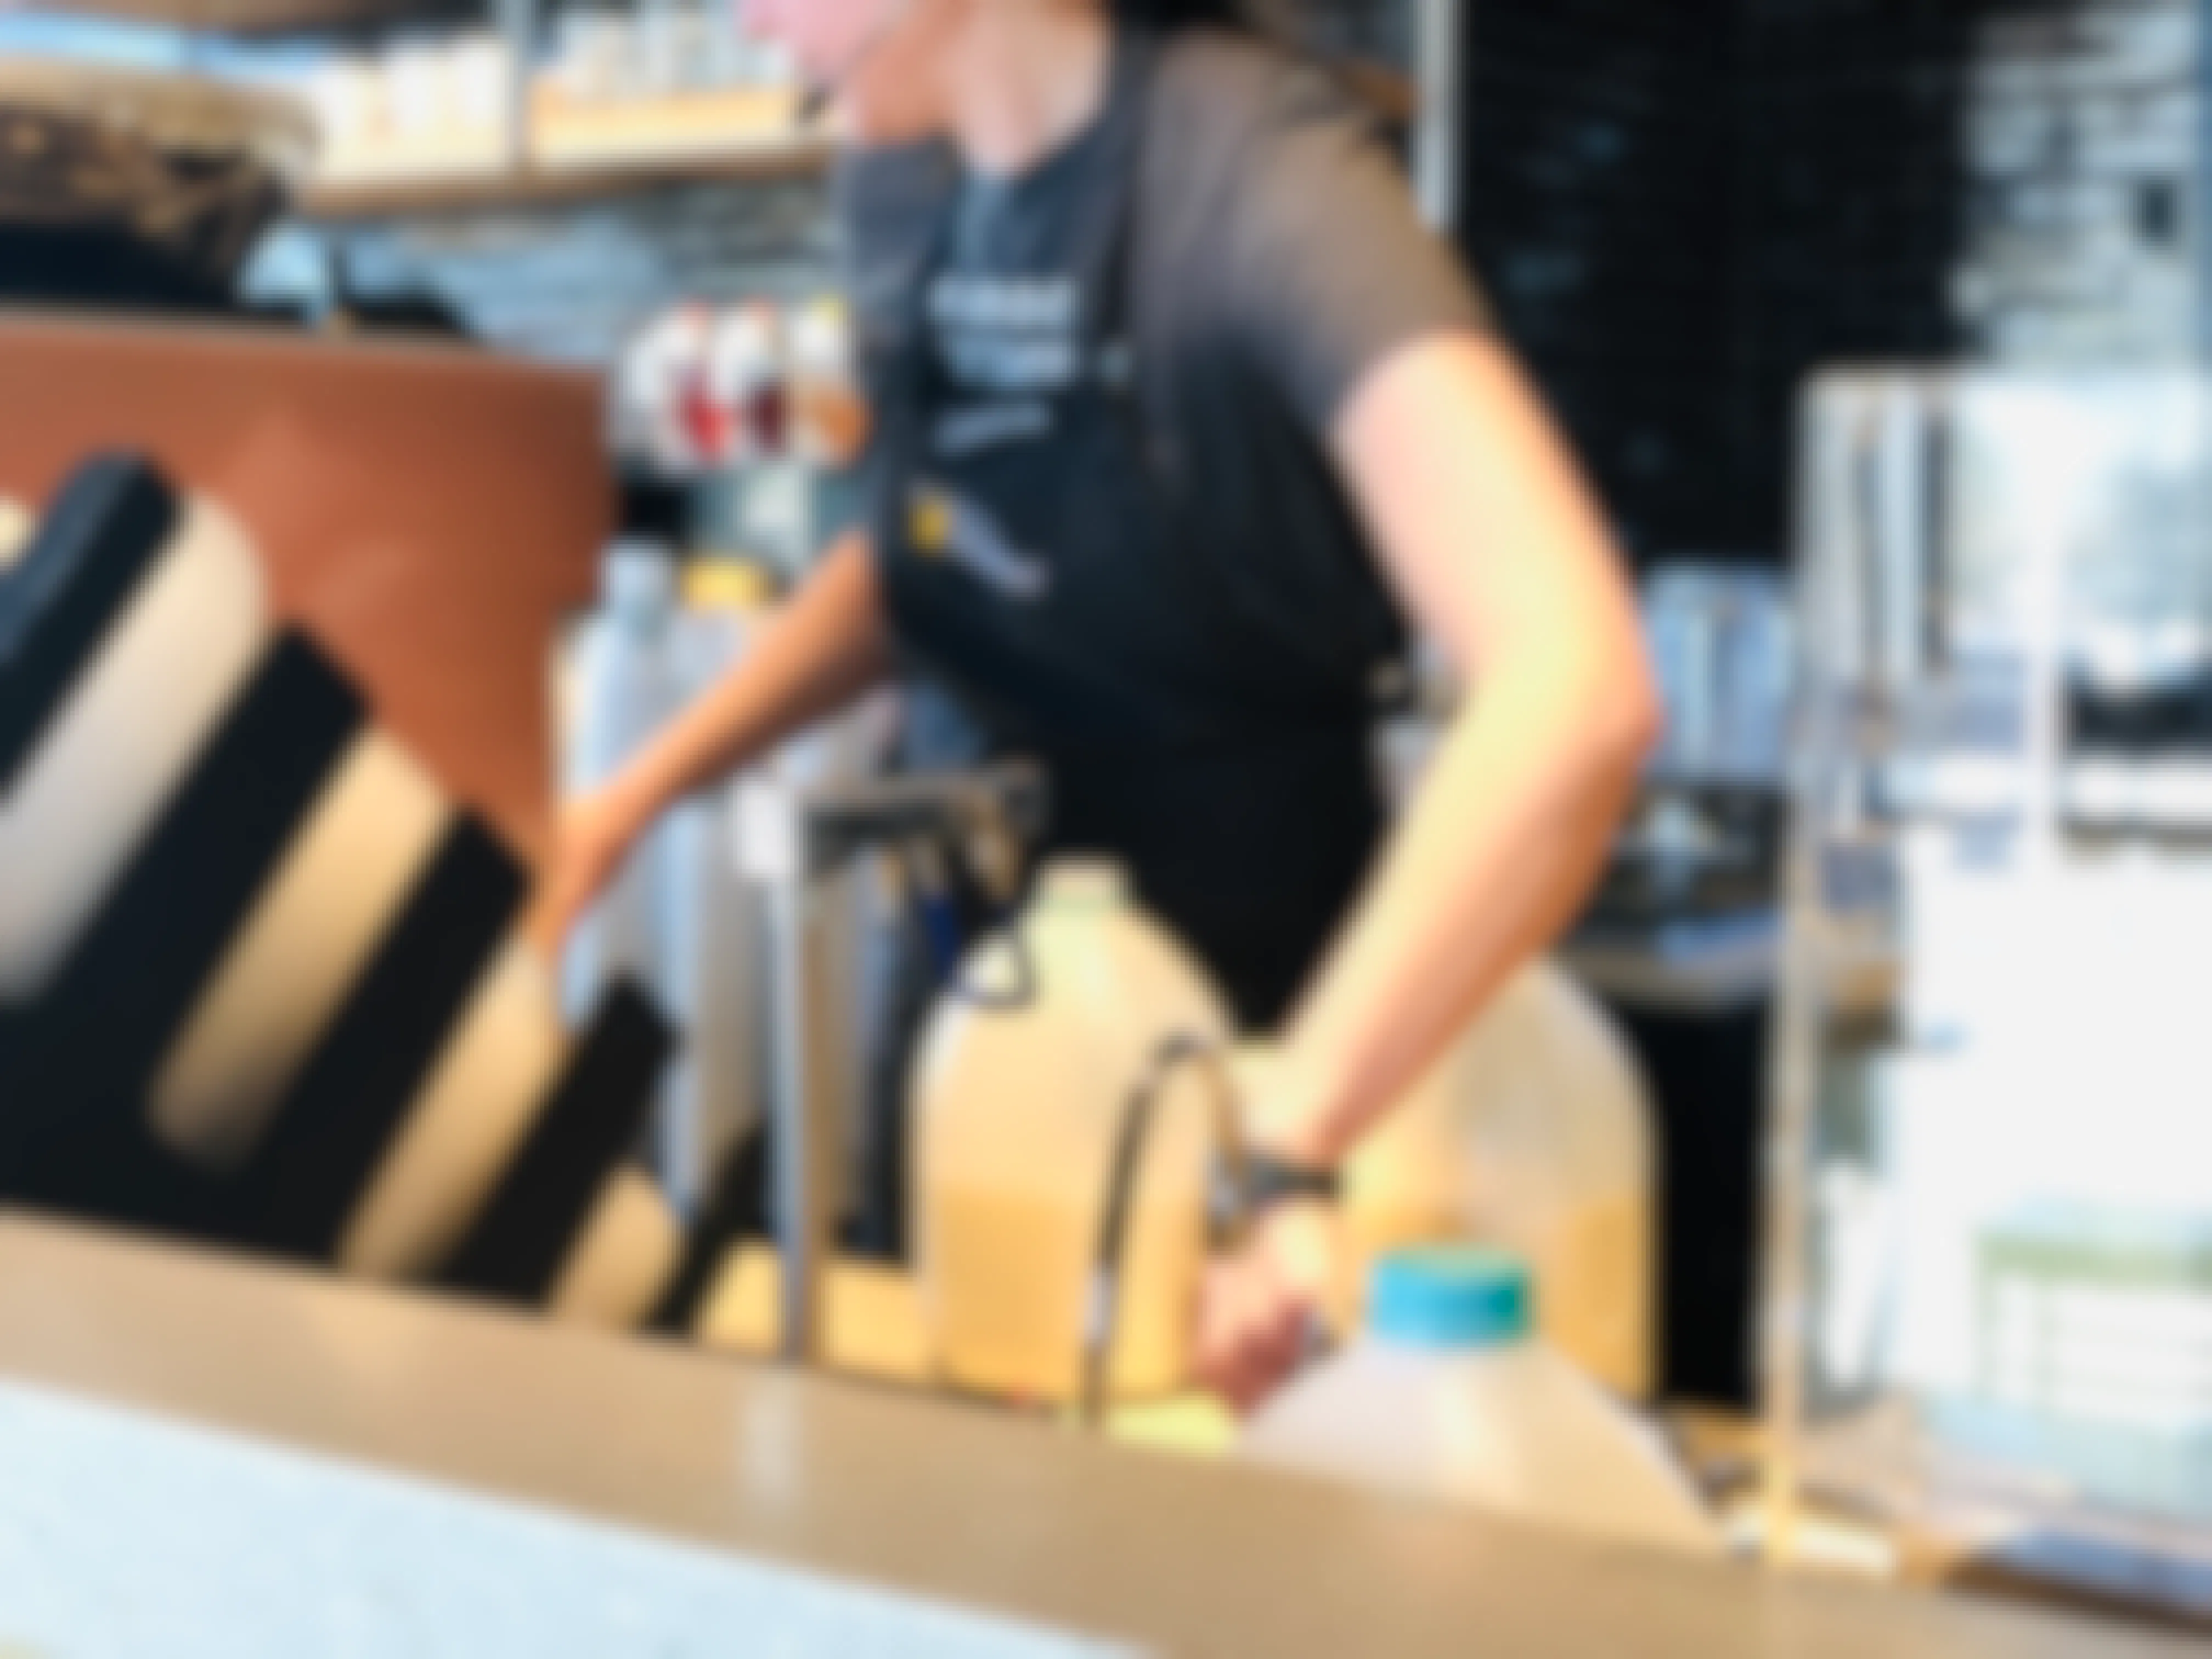 A Starbucks barista wearing a black apron working behind the counter at Starbucks. 